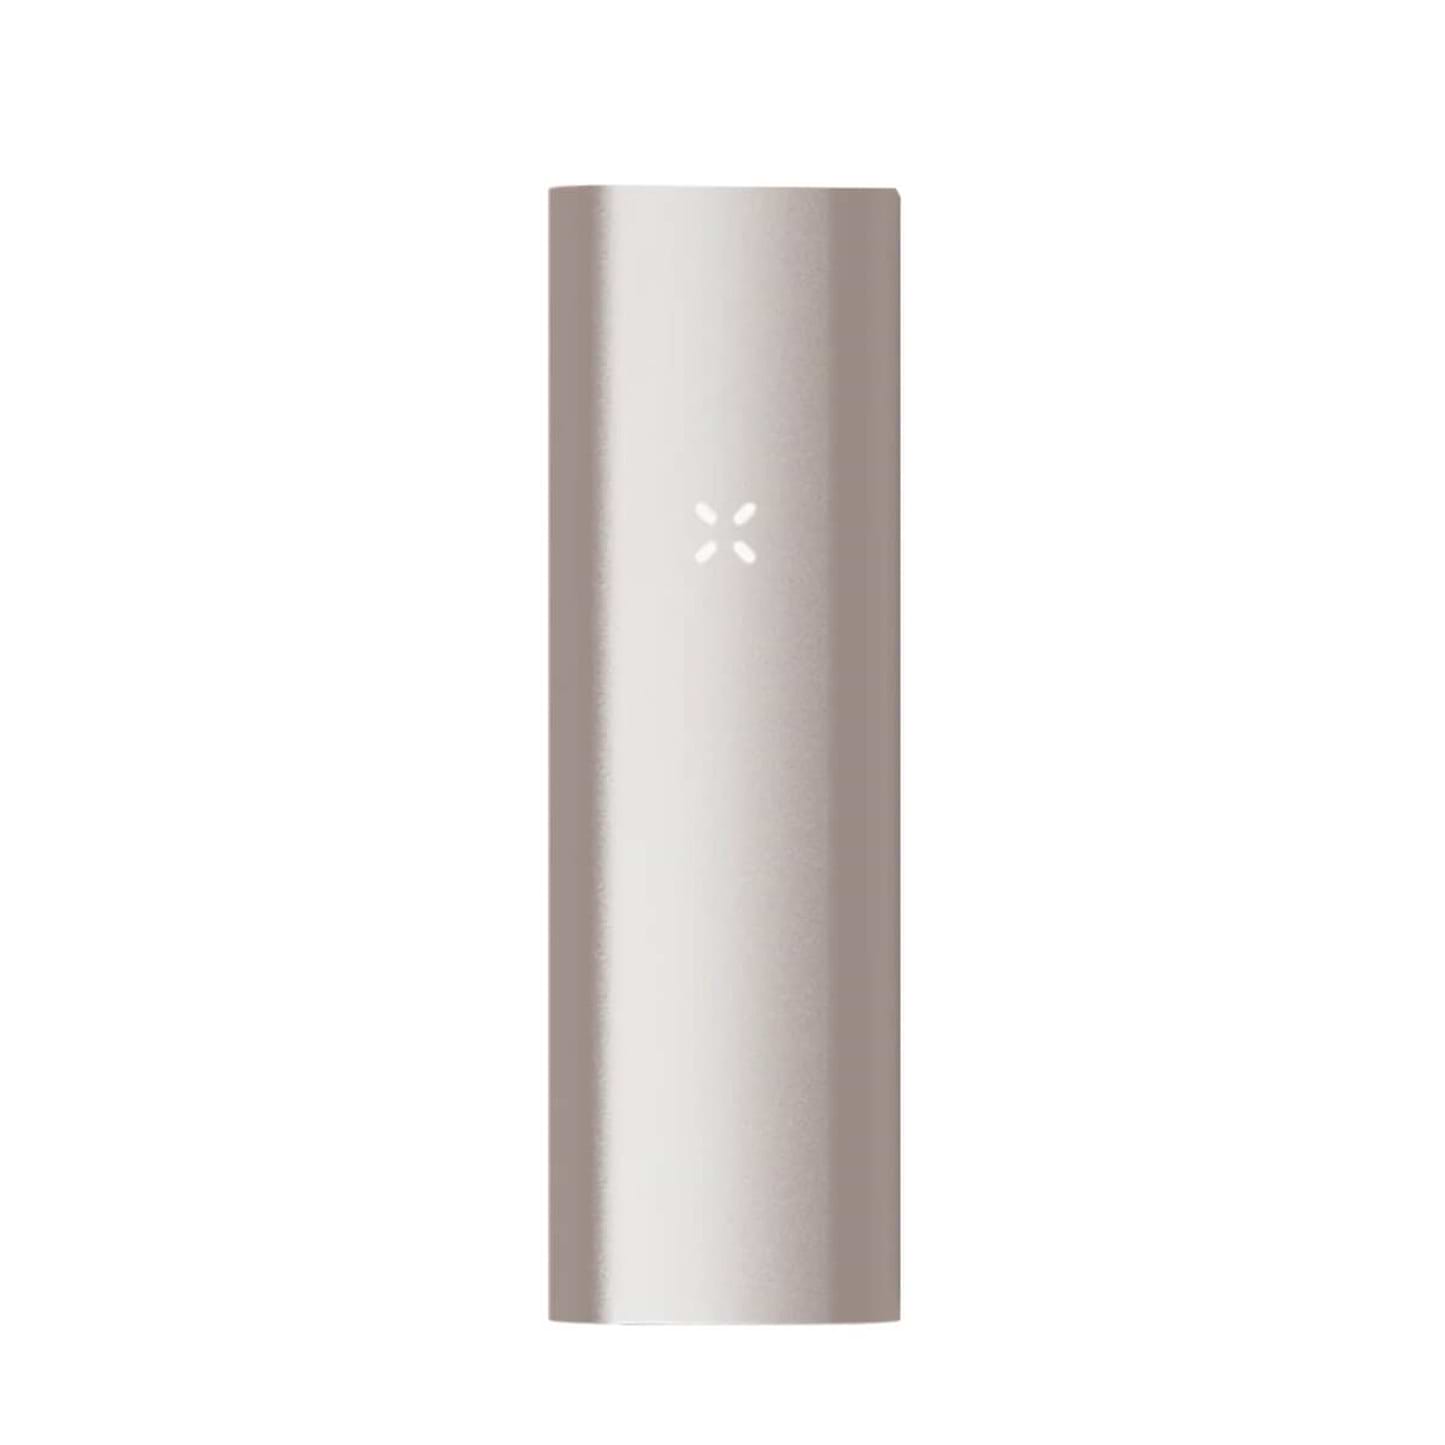 Pax Labs PAX 3 Vape Complete Kit - 4in Sand